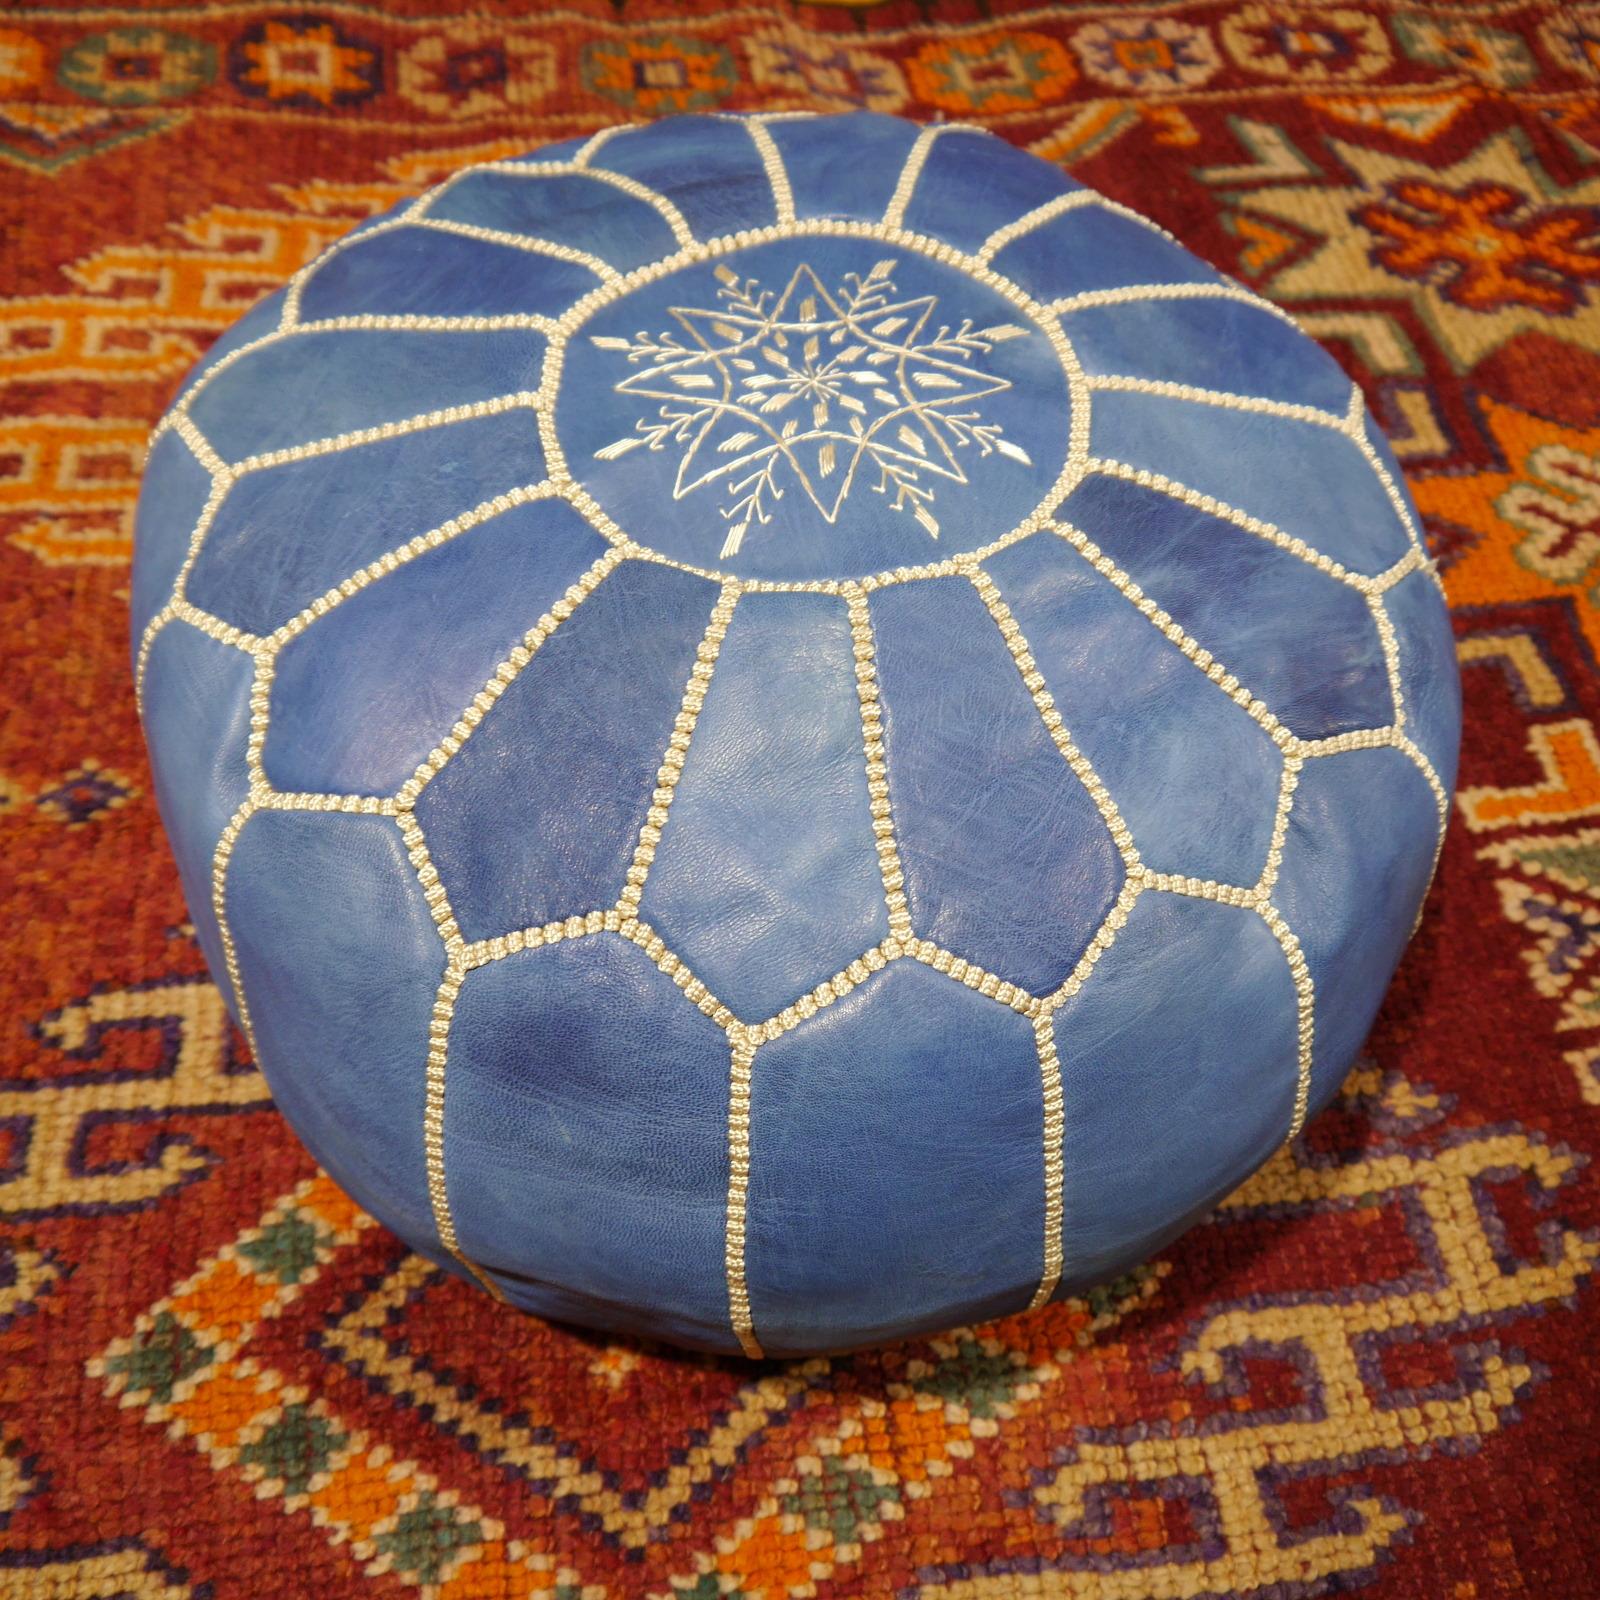 Hand-Crafted Moroccan Pouf Ottoman Handmade Jeans or Navy Blue Leather